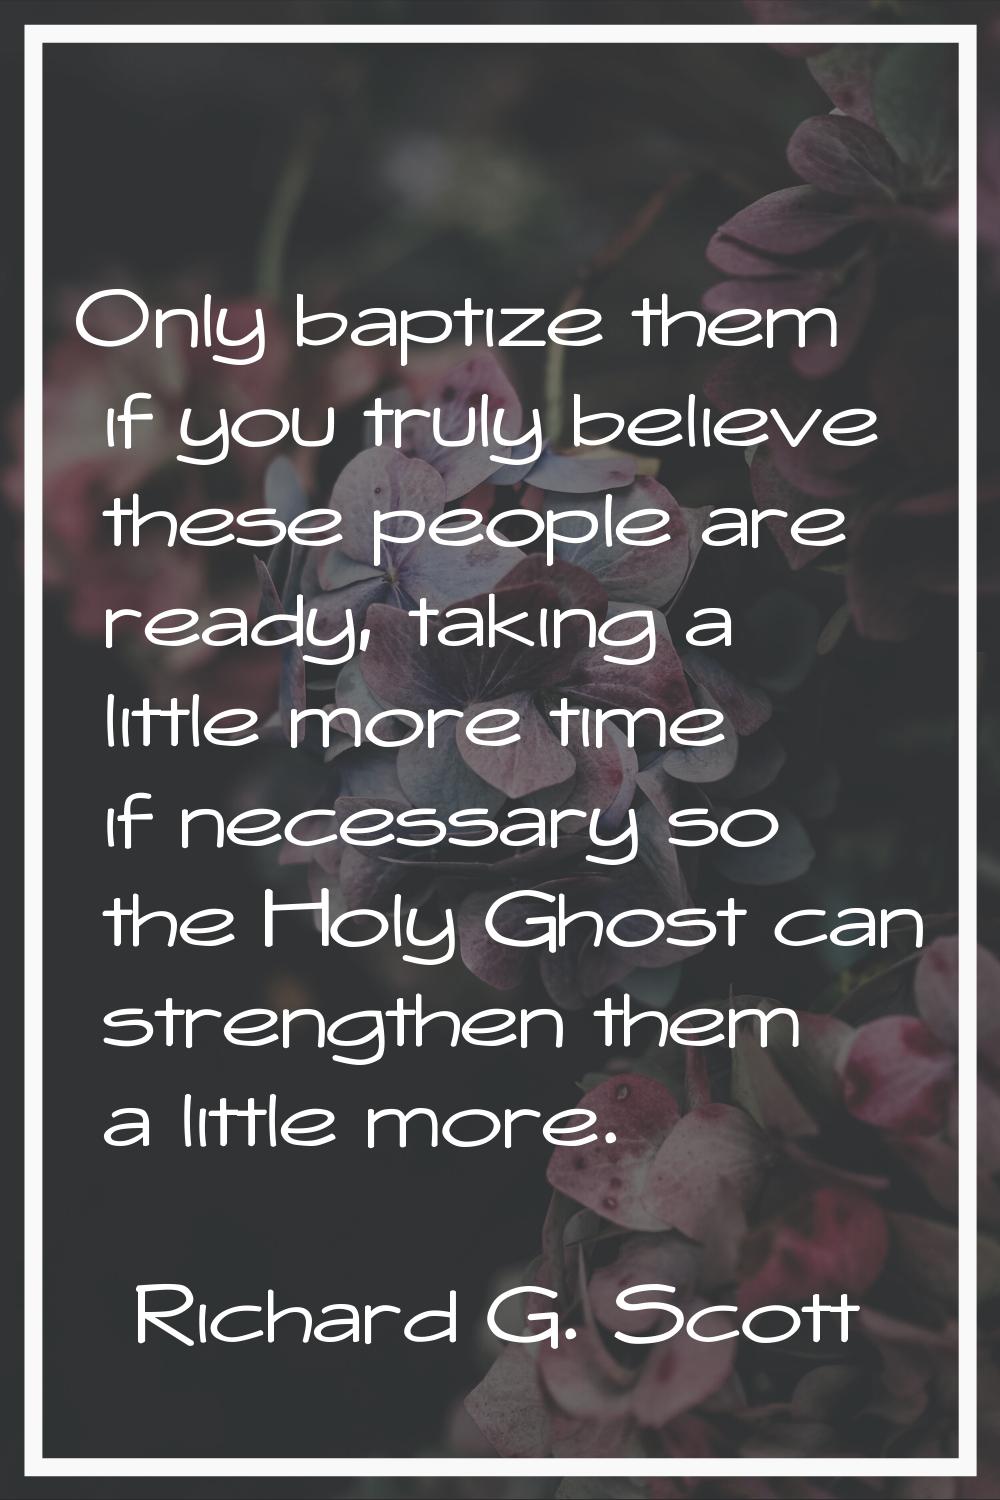 Only baptize them if you truly believe these people are ready, taking a little more time if necessa